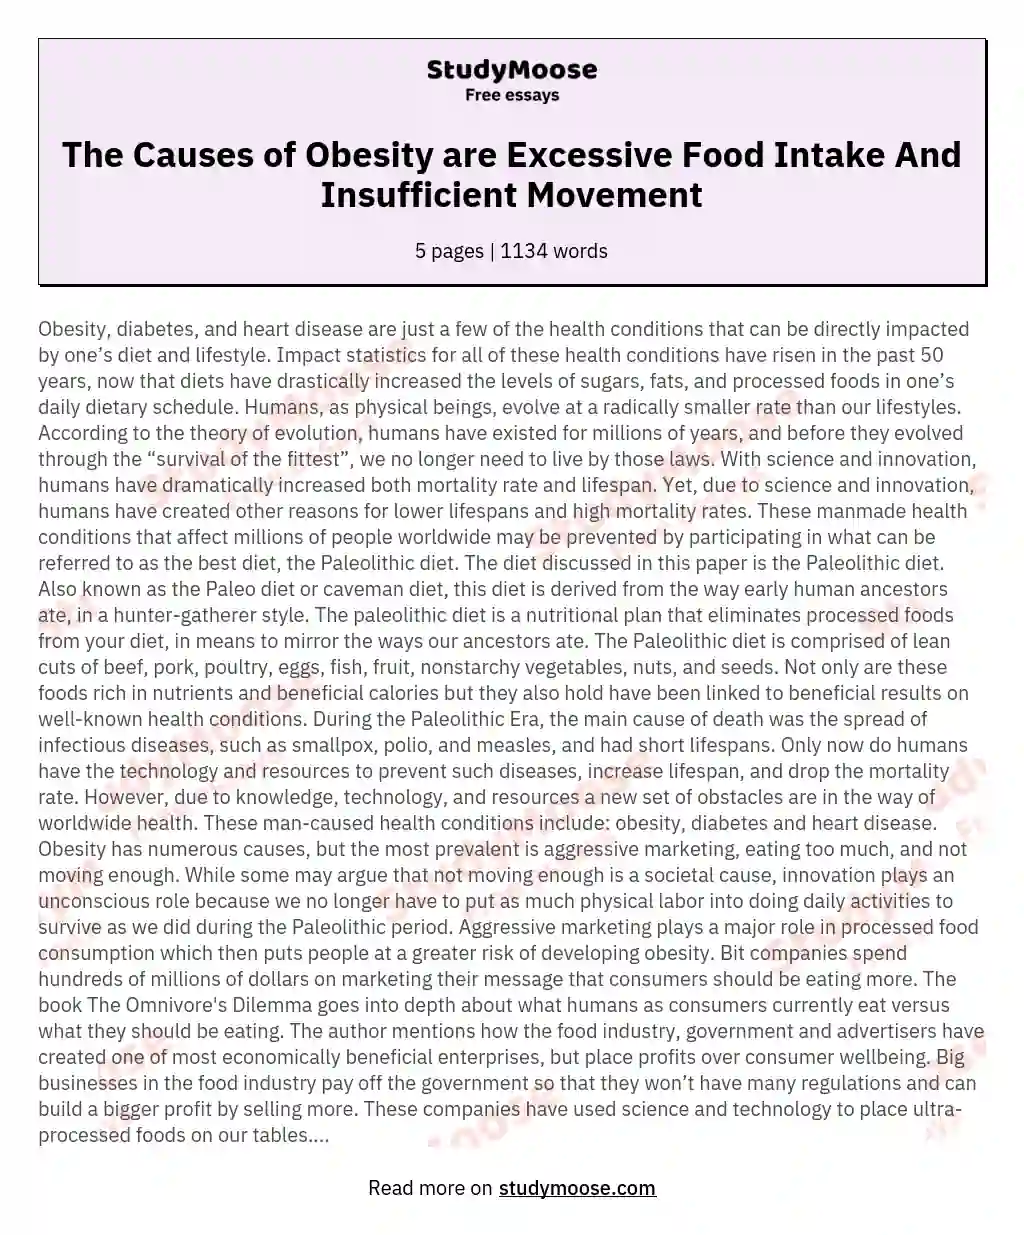 The Causes of Obesity are Excessive Food Intake And Insufficient Movement essay